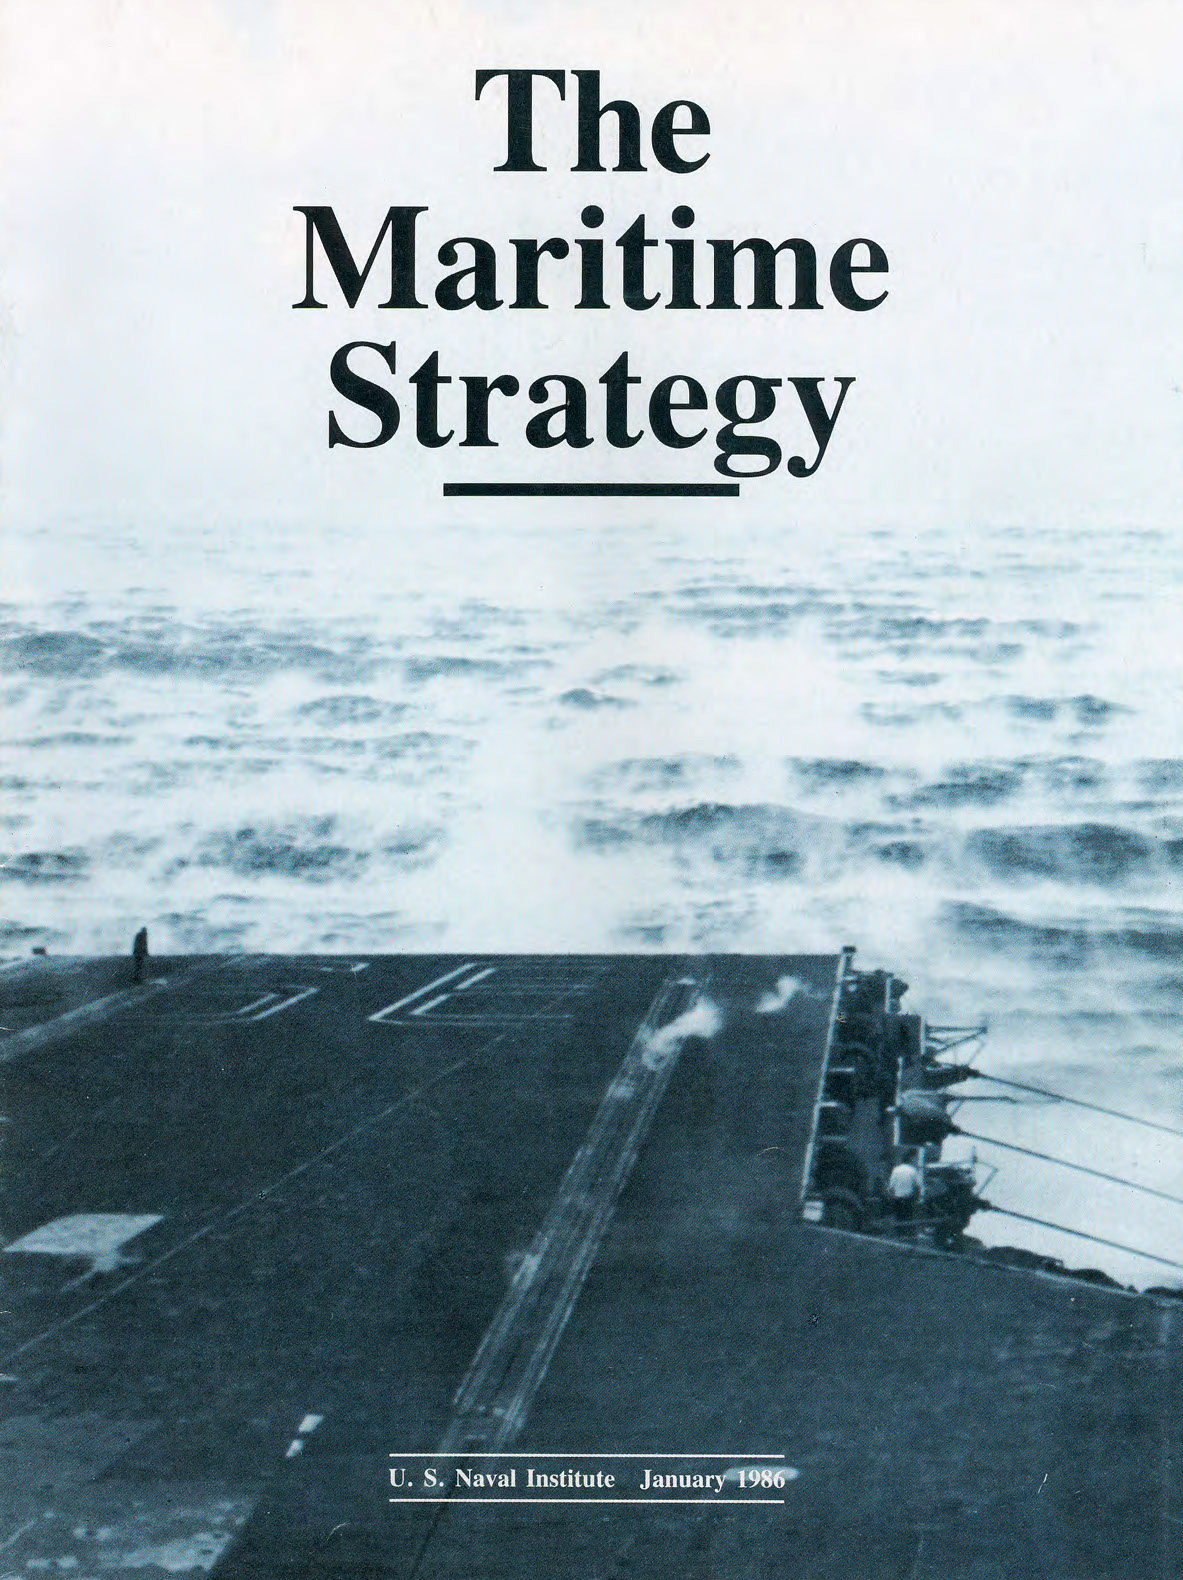 Proceedings - December 1986 Vol. 112:12:1,006  - The Maritime Strategy Supplement Cover